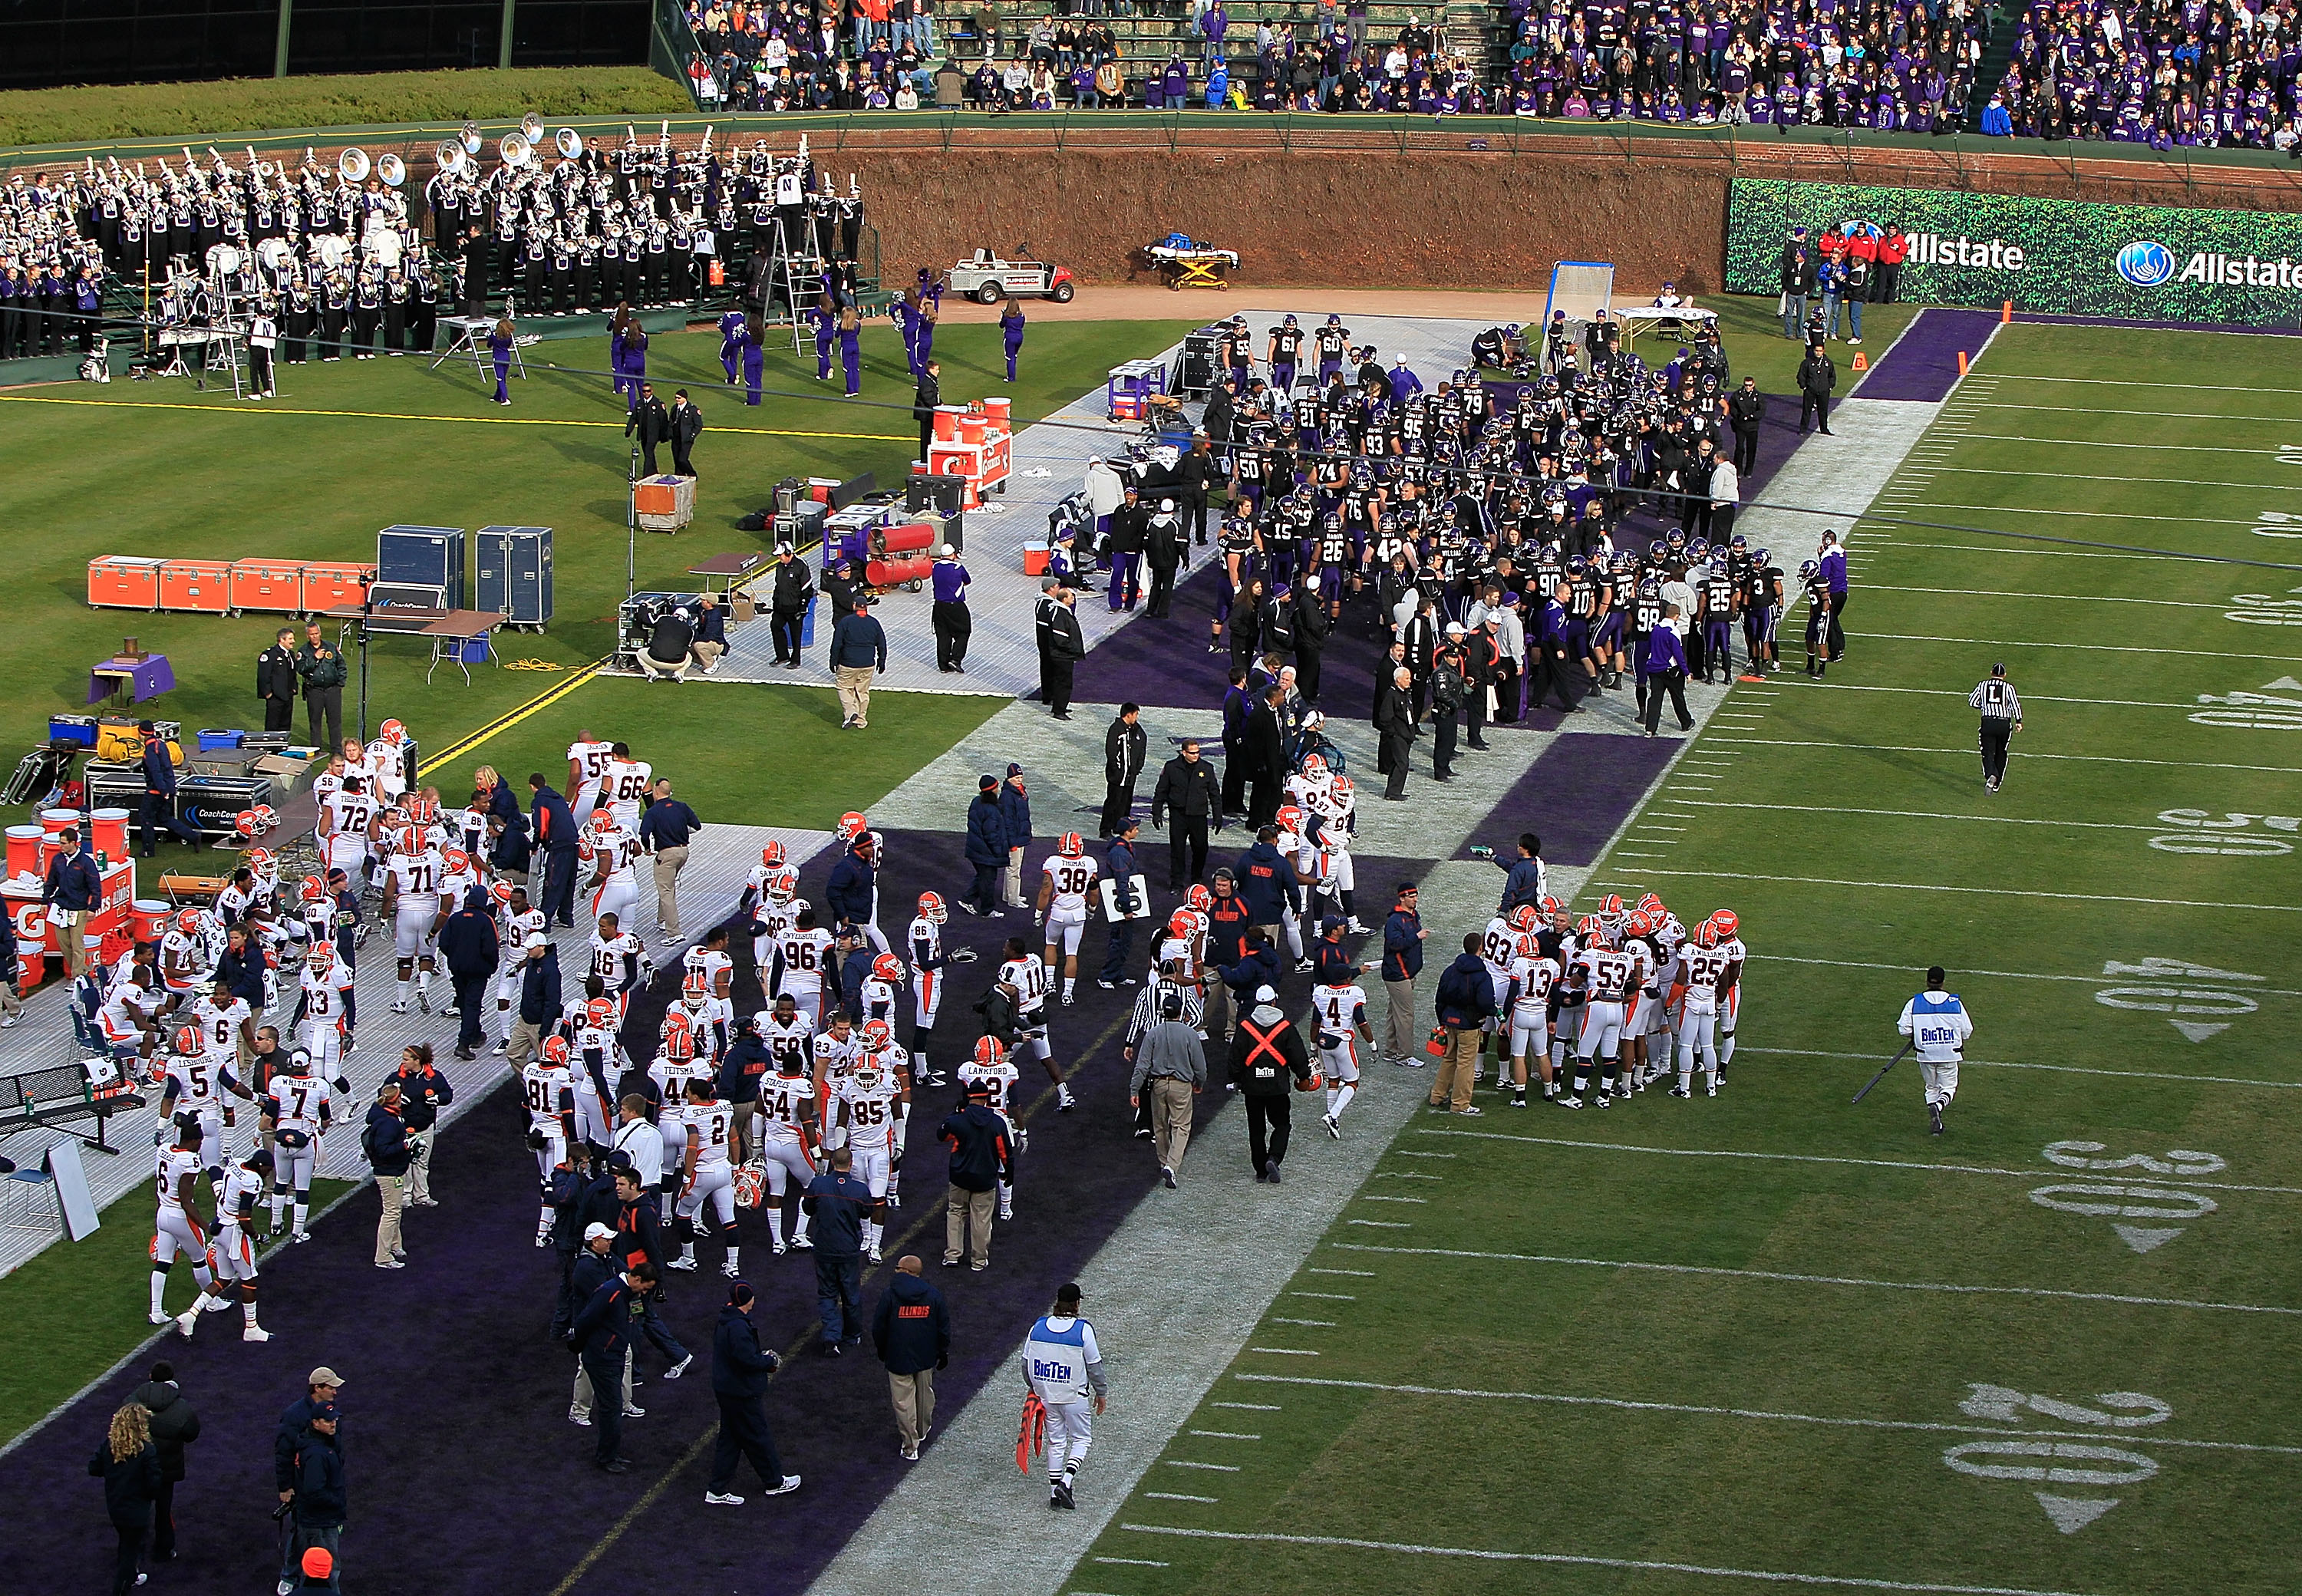 CHICAGO - NOVEMBER 20: Teams from the Northwestern Wildcats (top) and the Illinois Fighting Illini share a sideline during a game played at Wrigley Field on November 20, 2010 in Chicago, Illinois. (Photo by Jonathan Daniel/Getty Images)